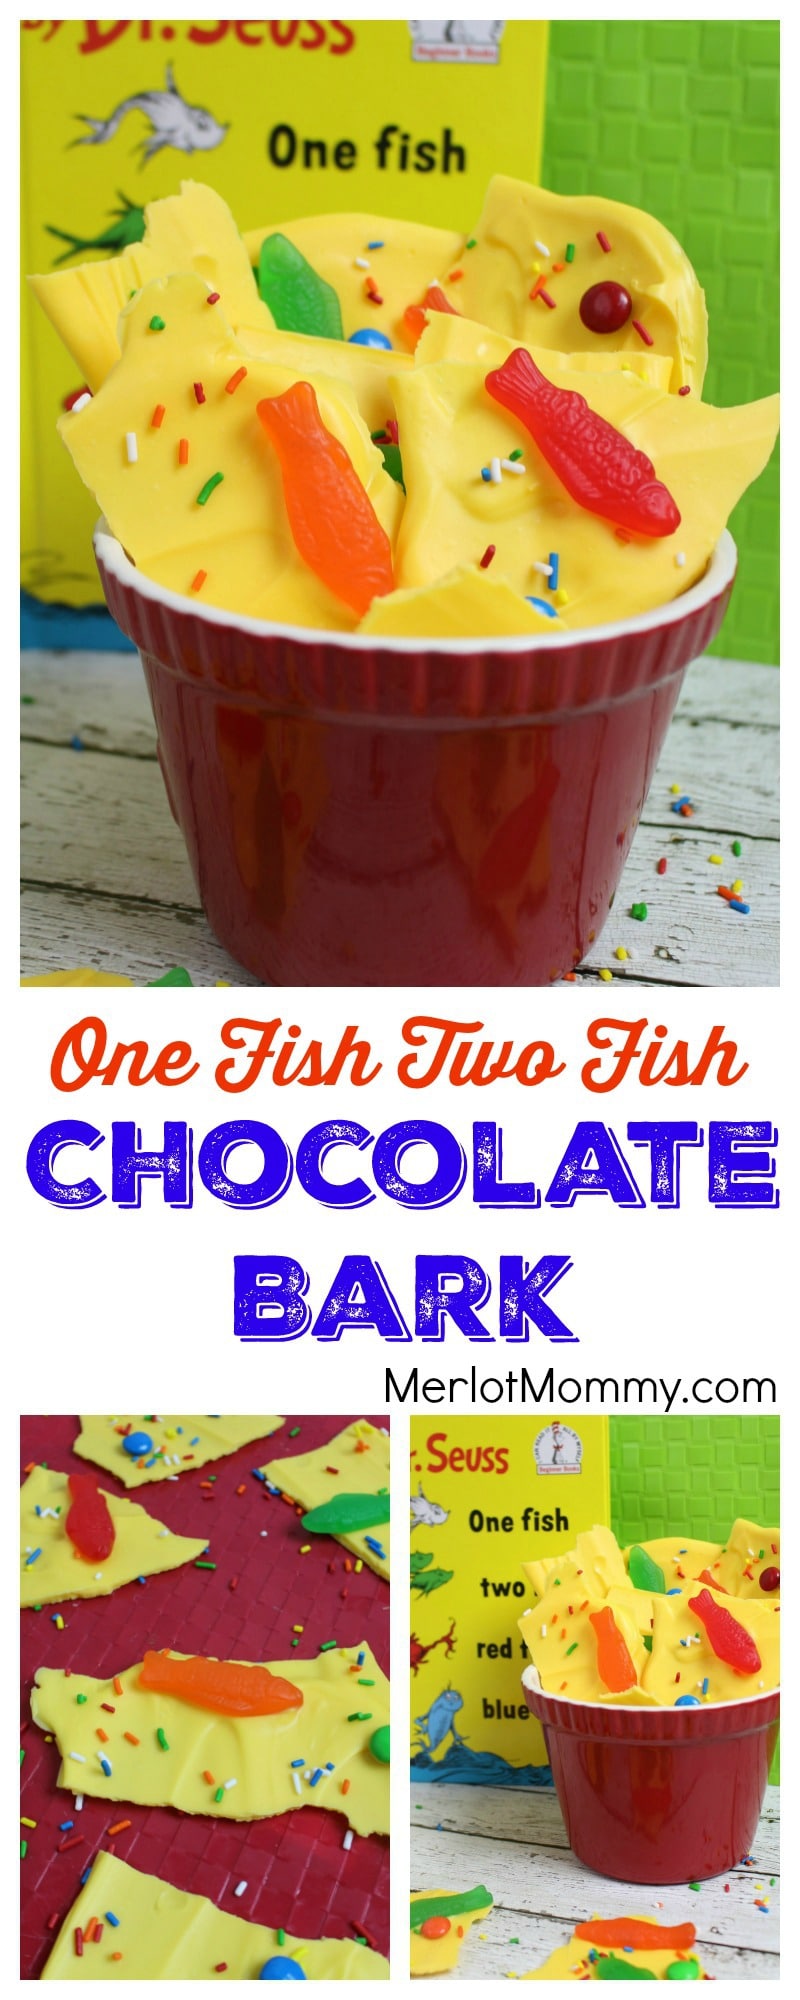 One Fish Two Fish Chocolate Bark Dr. Seuss-Inspired Recipe